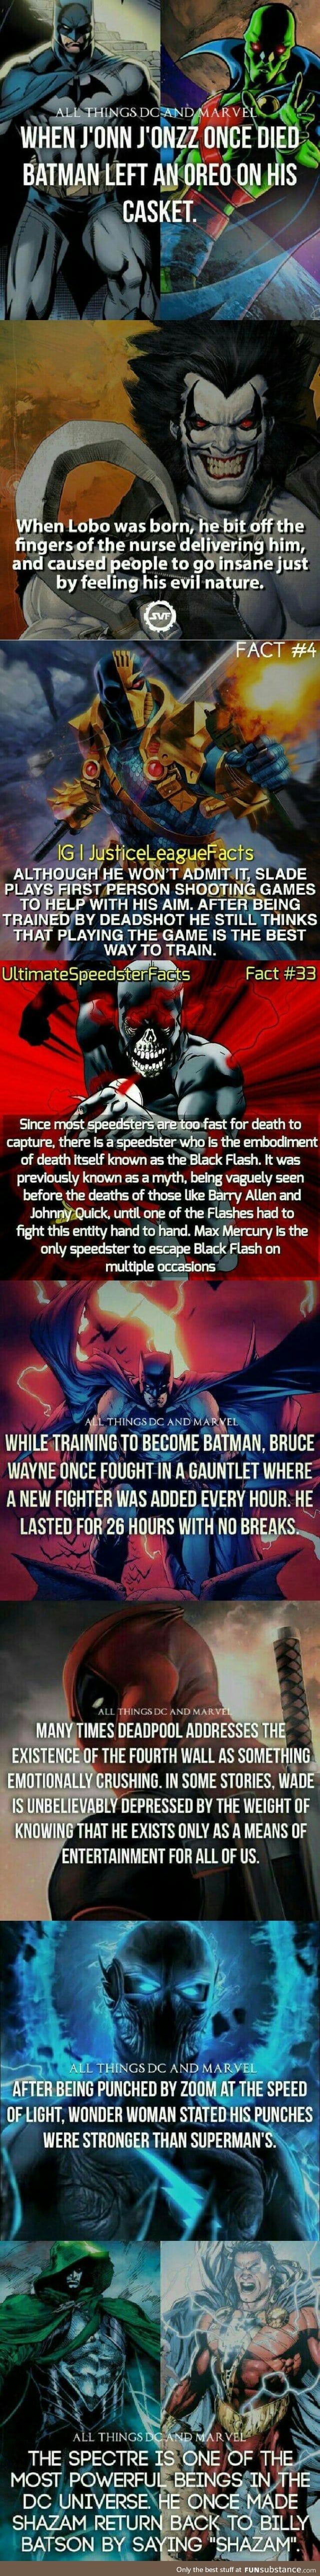 Marvel & DC facts comp